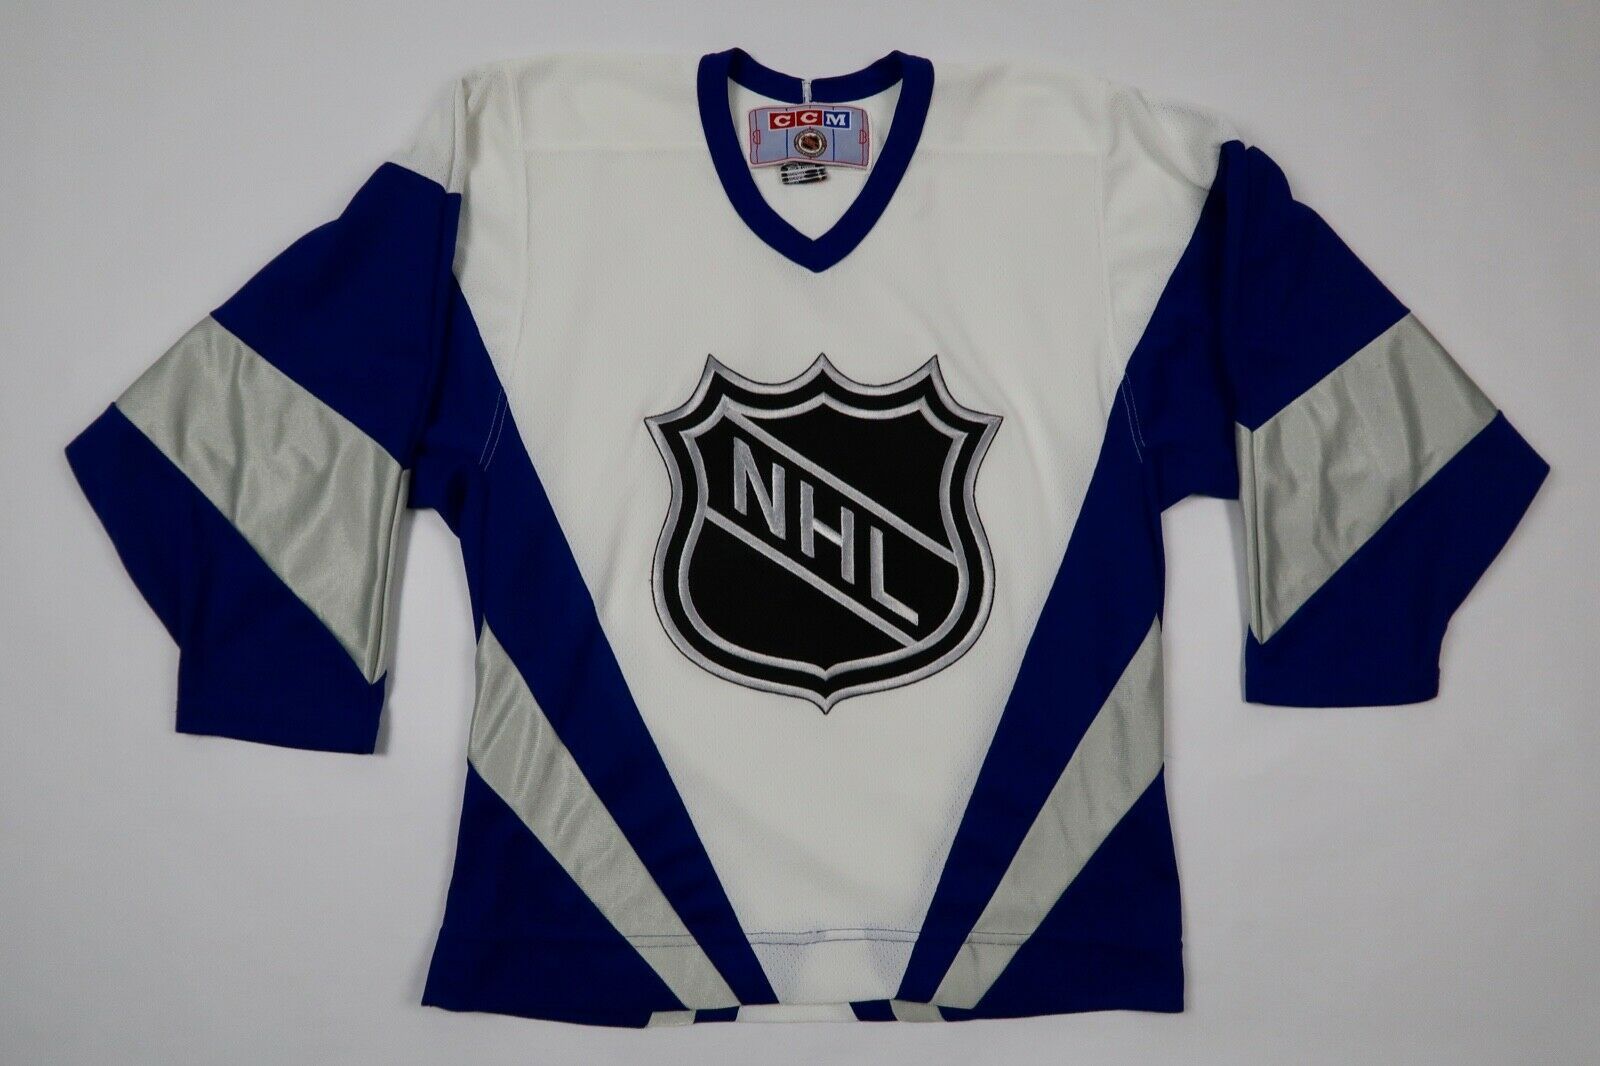 Ccm VTG 1998 NHL All Star Game CCM Hockey Jersey Authentic Rare 90s Size US S / EU 44-46 / 1 - 1 Preview